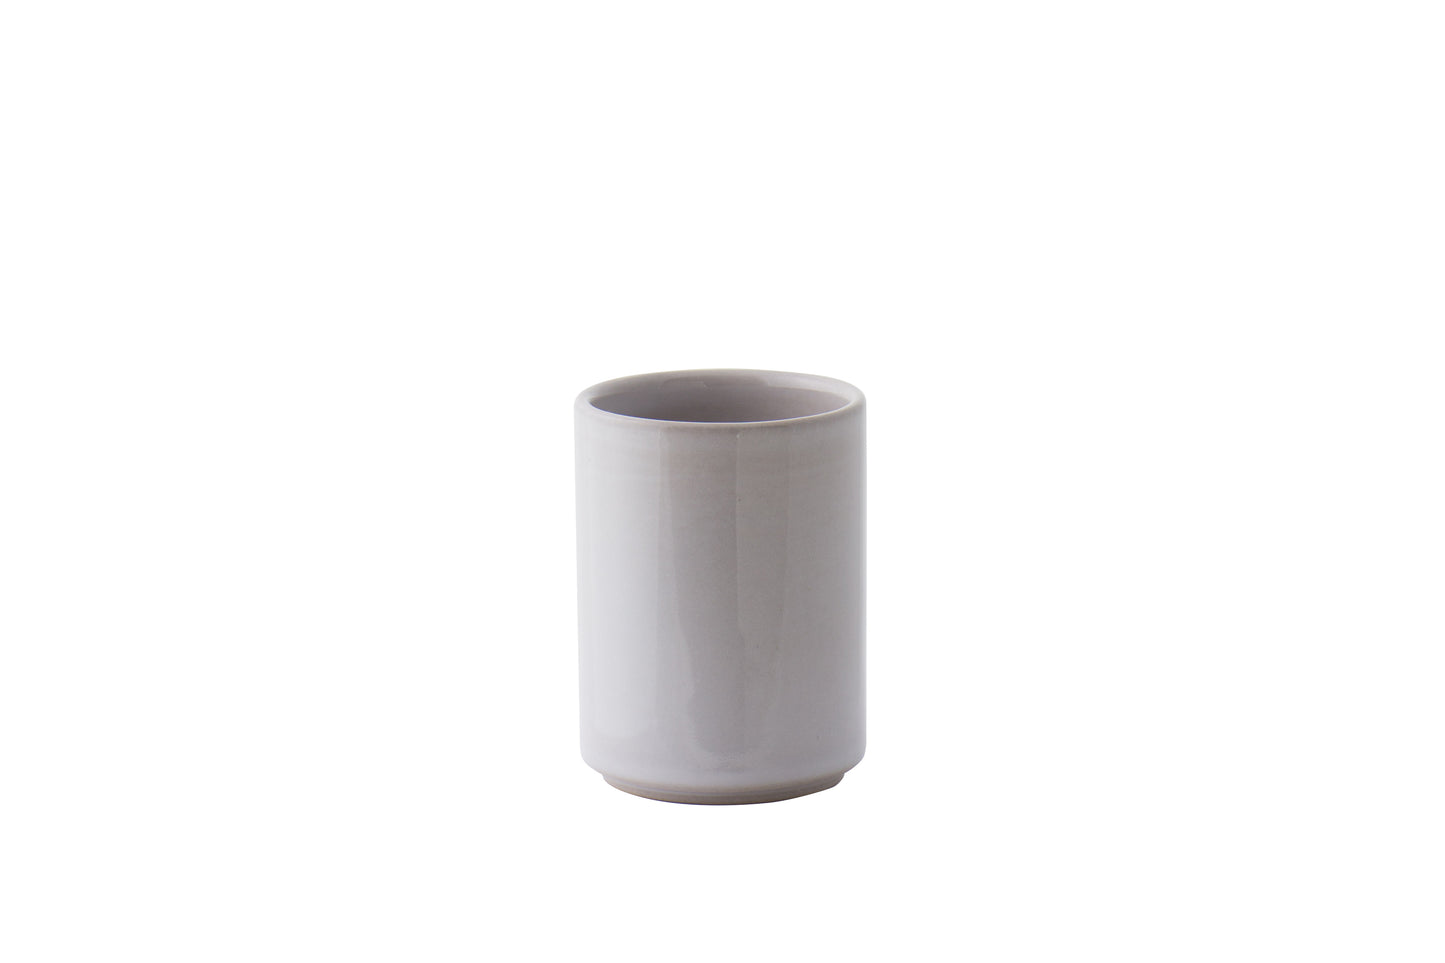 natural color stoneware cup — design ADONDE — made in portugal by Borralheira